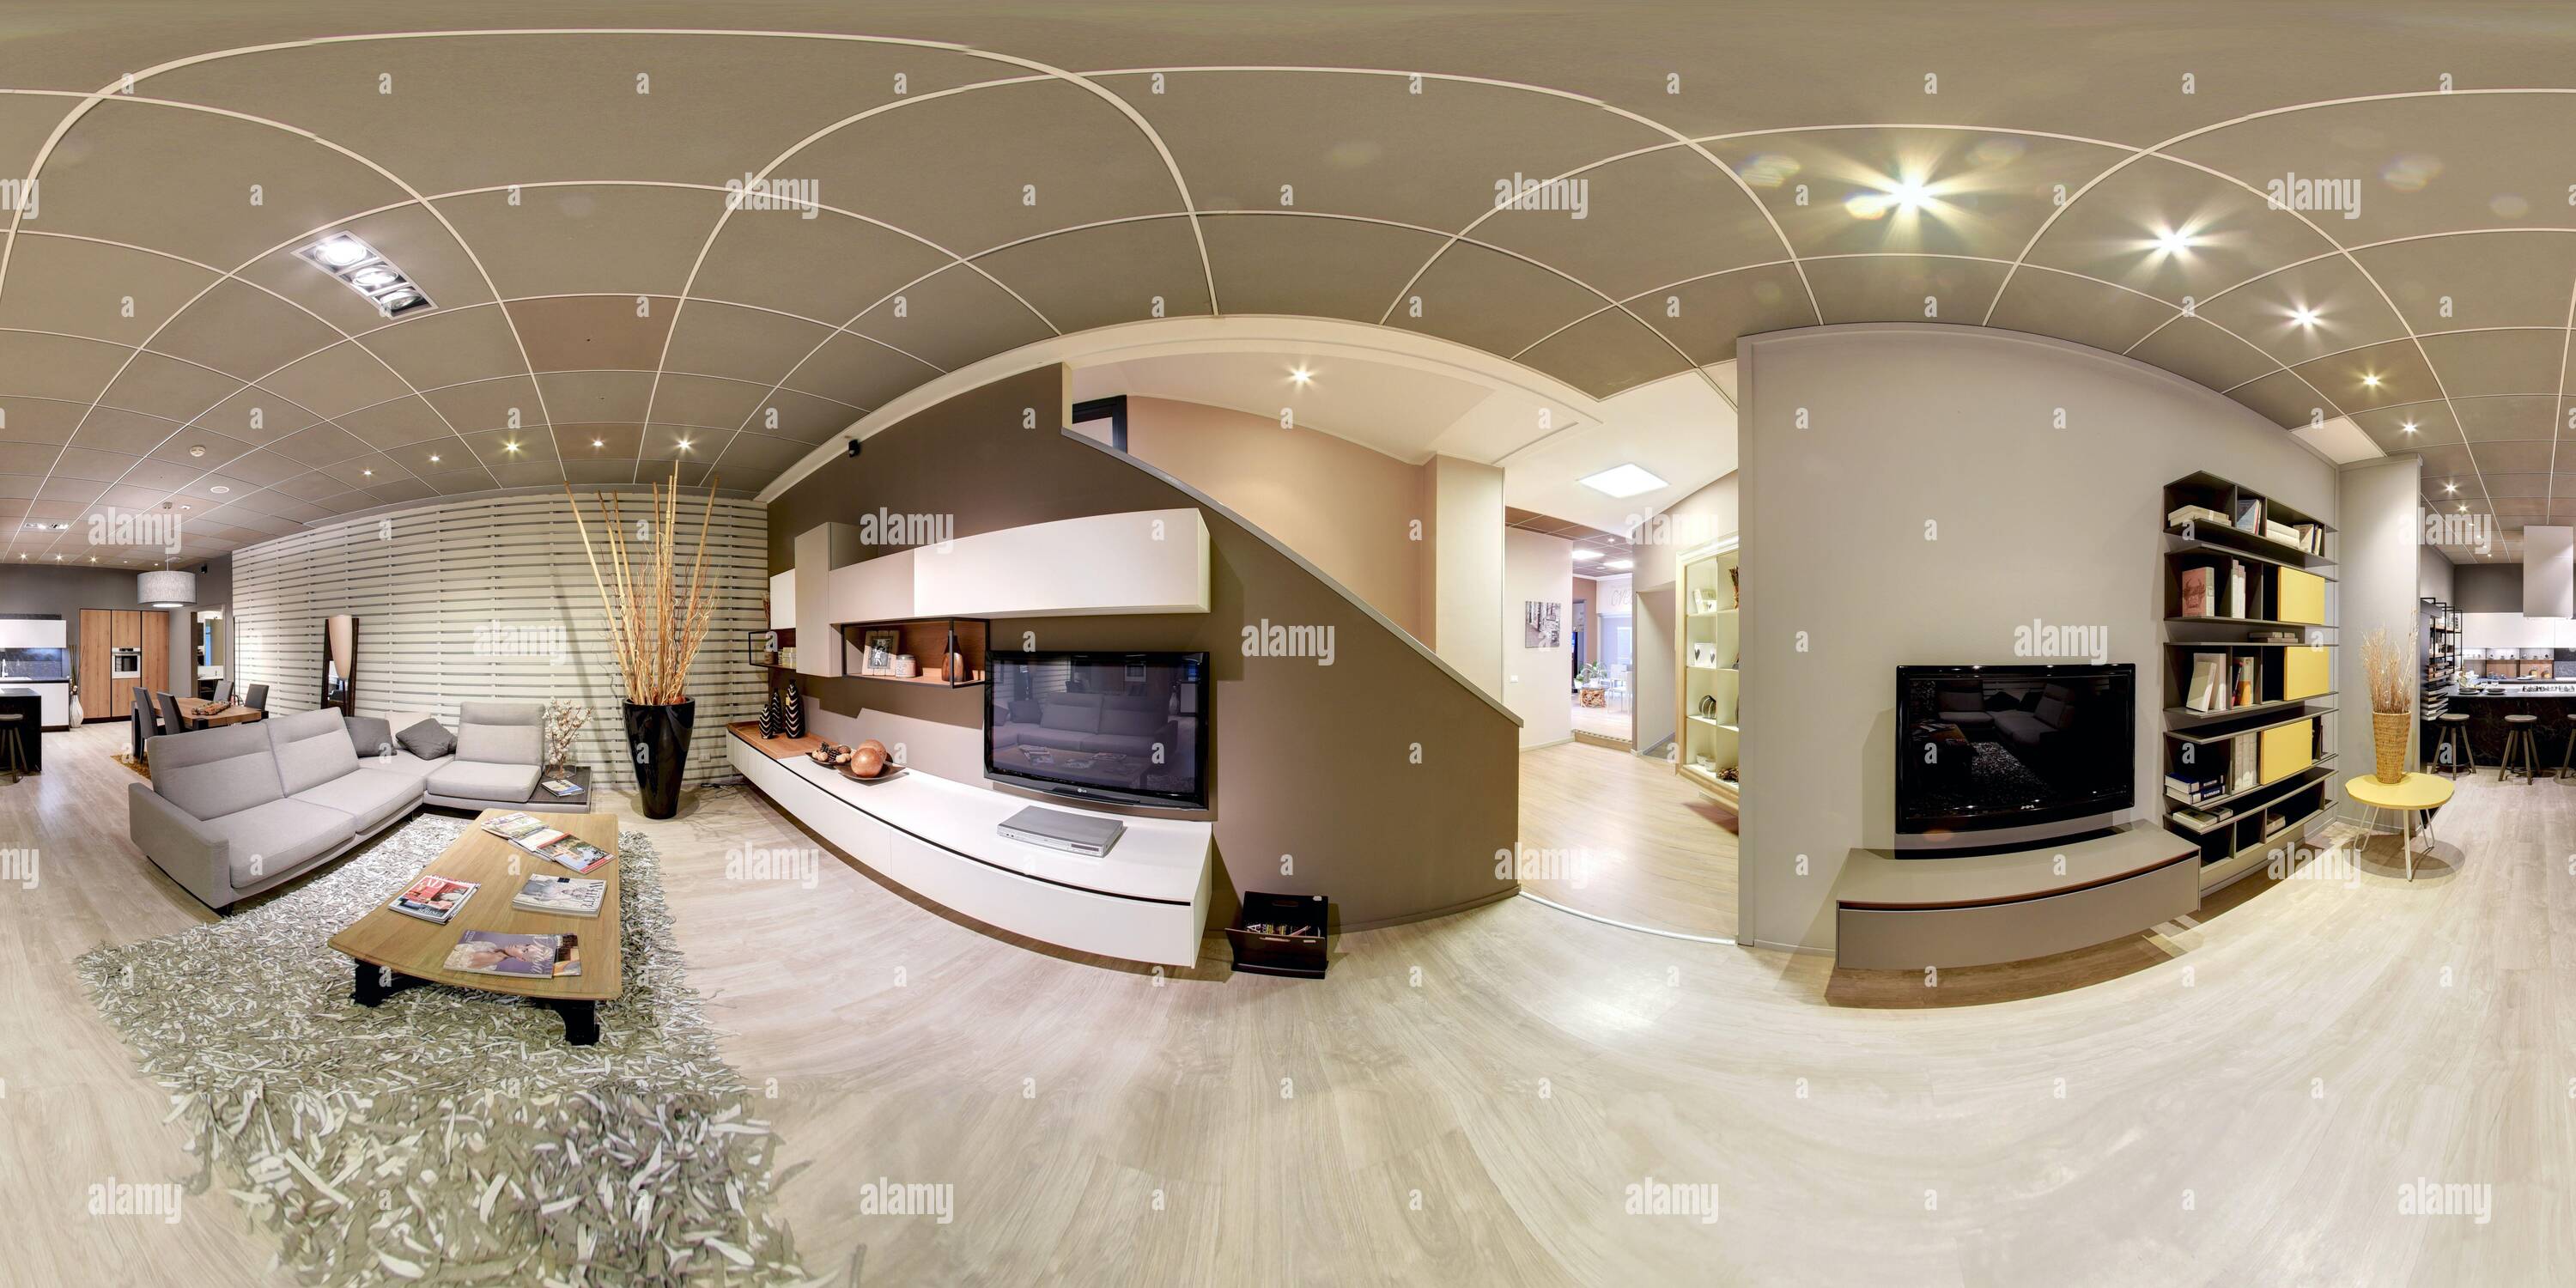 360 degree panoramic view of 360 degree panorama of an upmarket living room interior with beige decor, modern furniture and personal effects